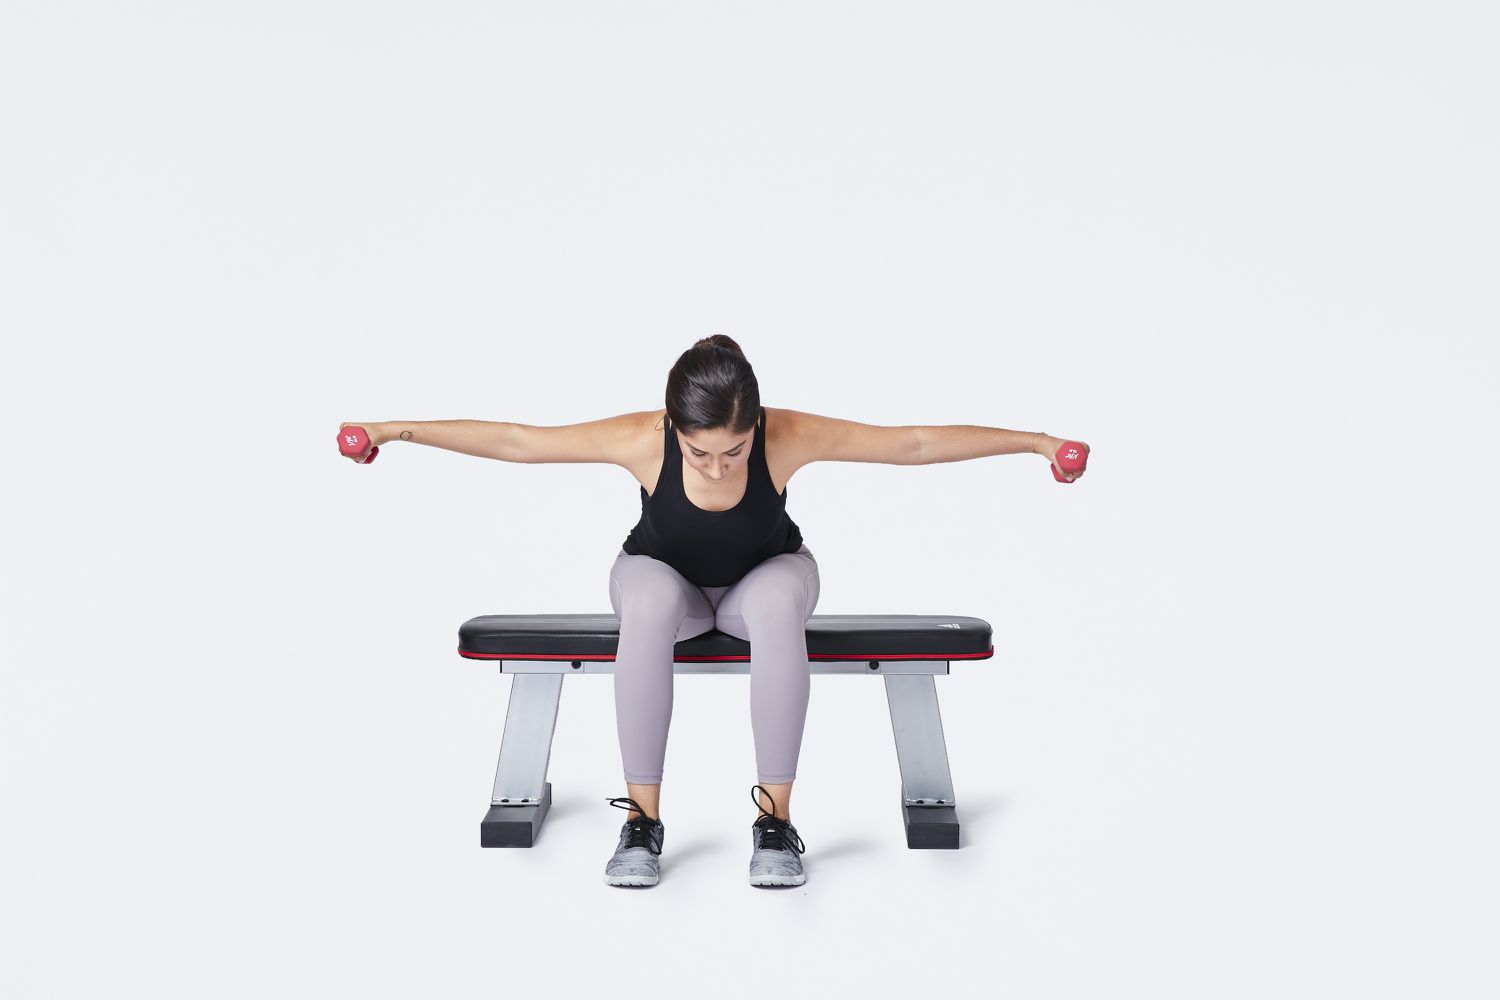  Bài tập Seated Dumbbell Fly